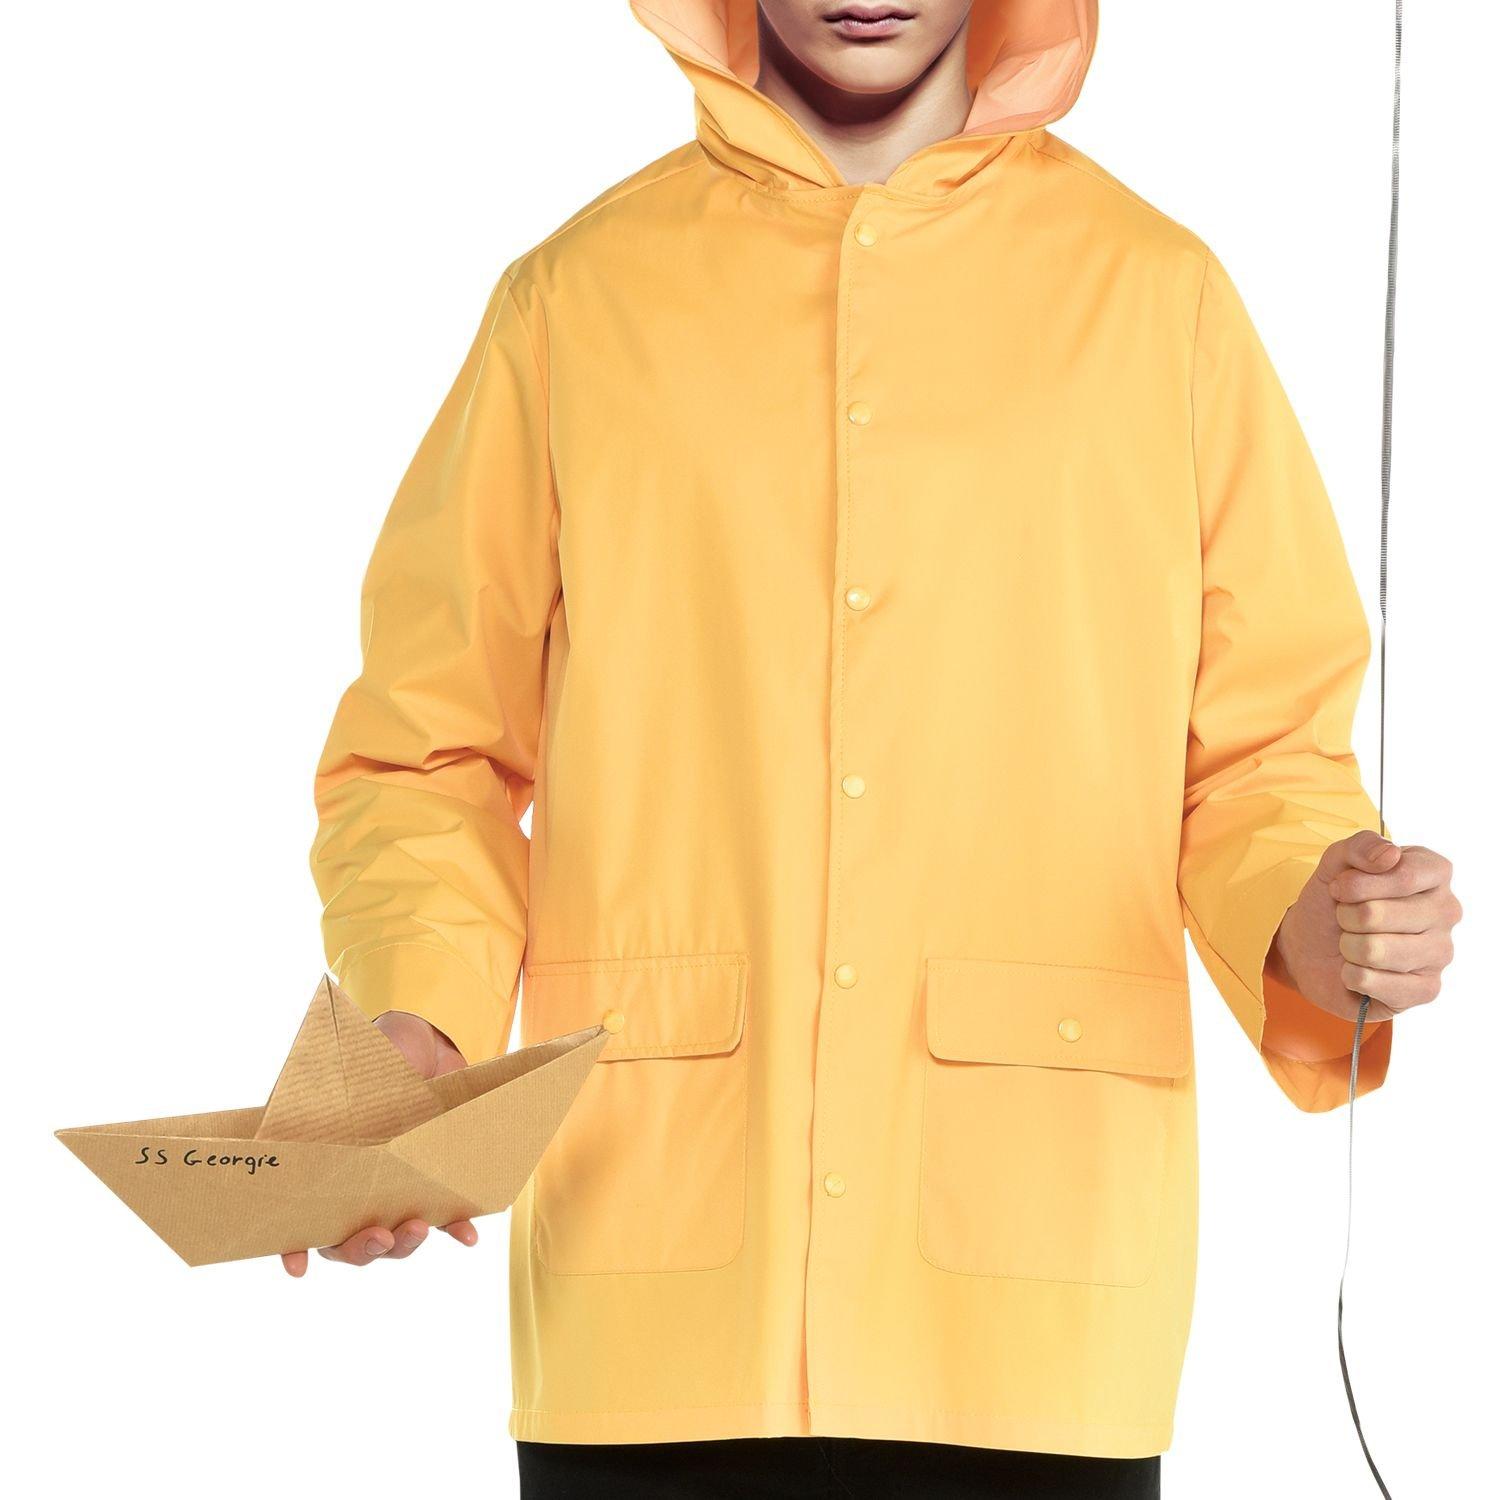 Georgie's Yellow Raincoat Costume from It | Party City